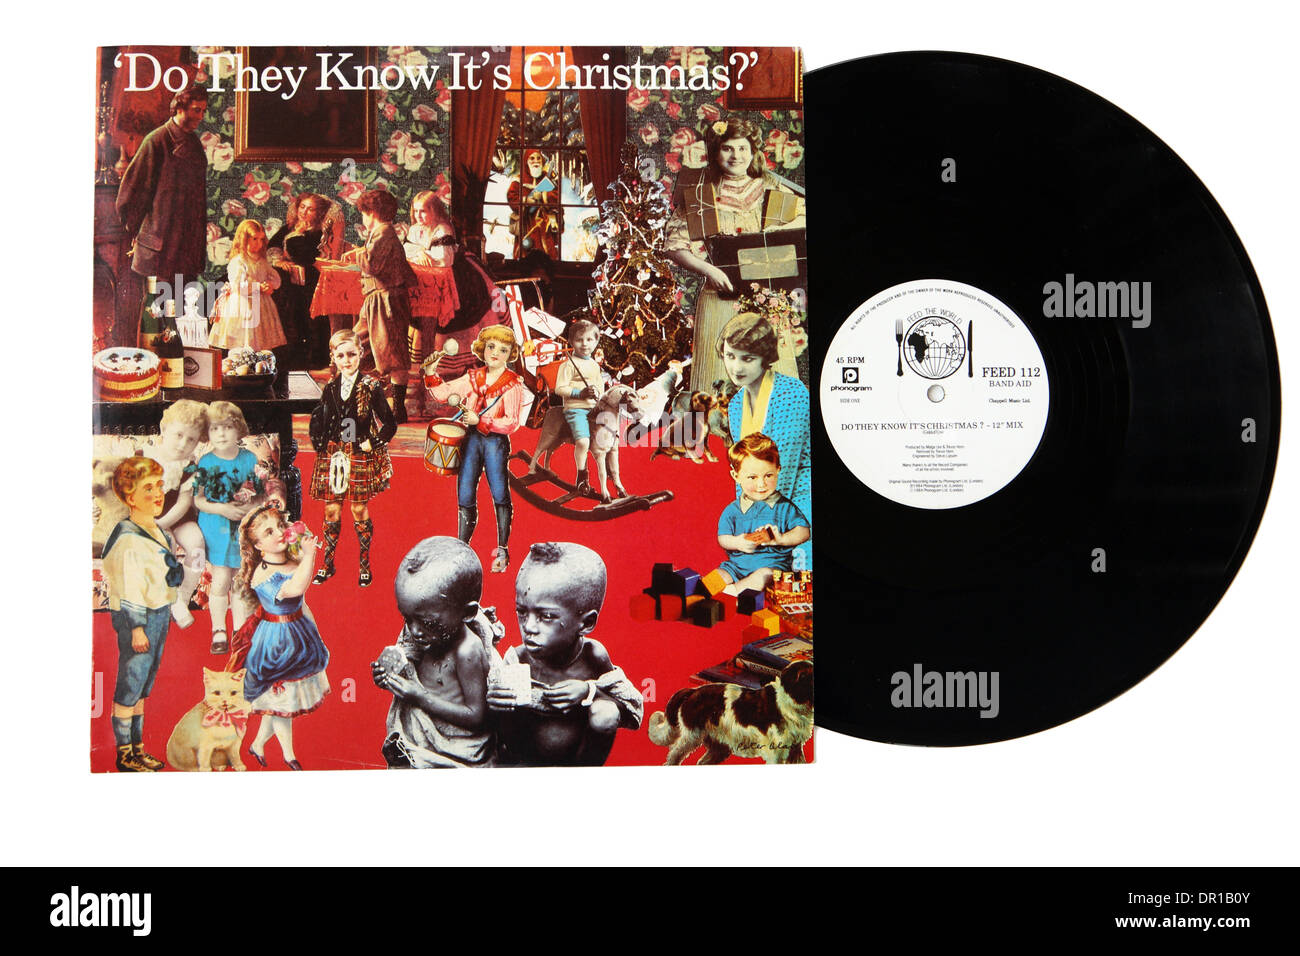 Band Aid, 'Do they Know It's Christmas' LP Record on a white background produced to raise money for anti-poverty in Ethiopia Stock Photo